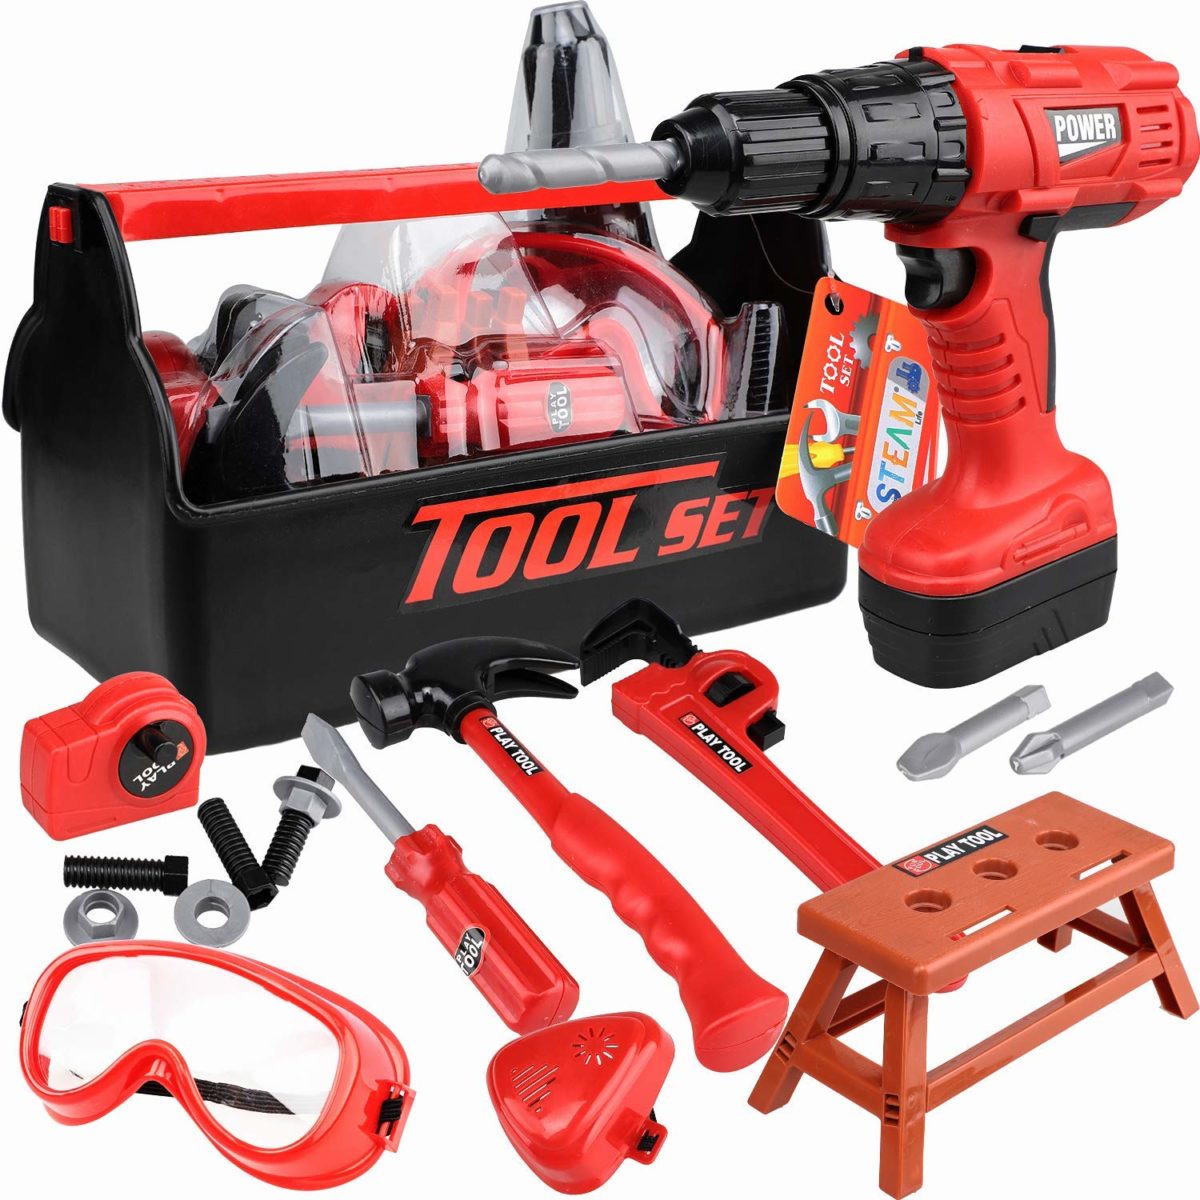 STEAM Life Kids Tool Set with Power Toy Drill - Top Toys and Gifts for Seven Year Old Boys 1